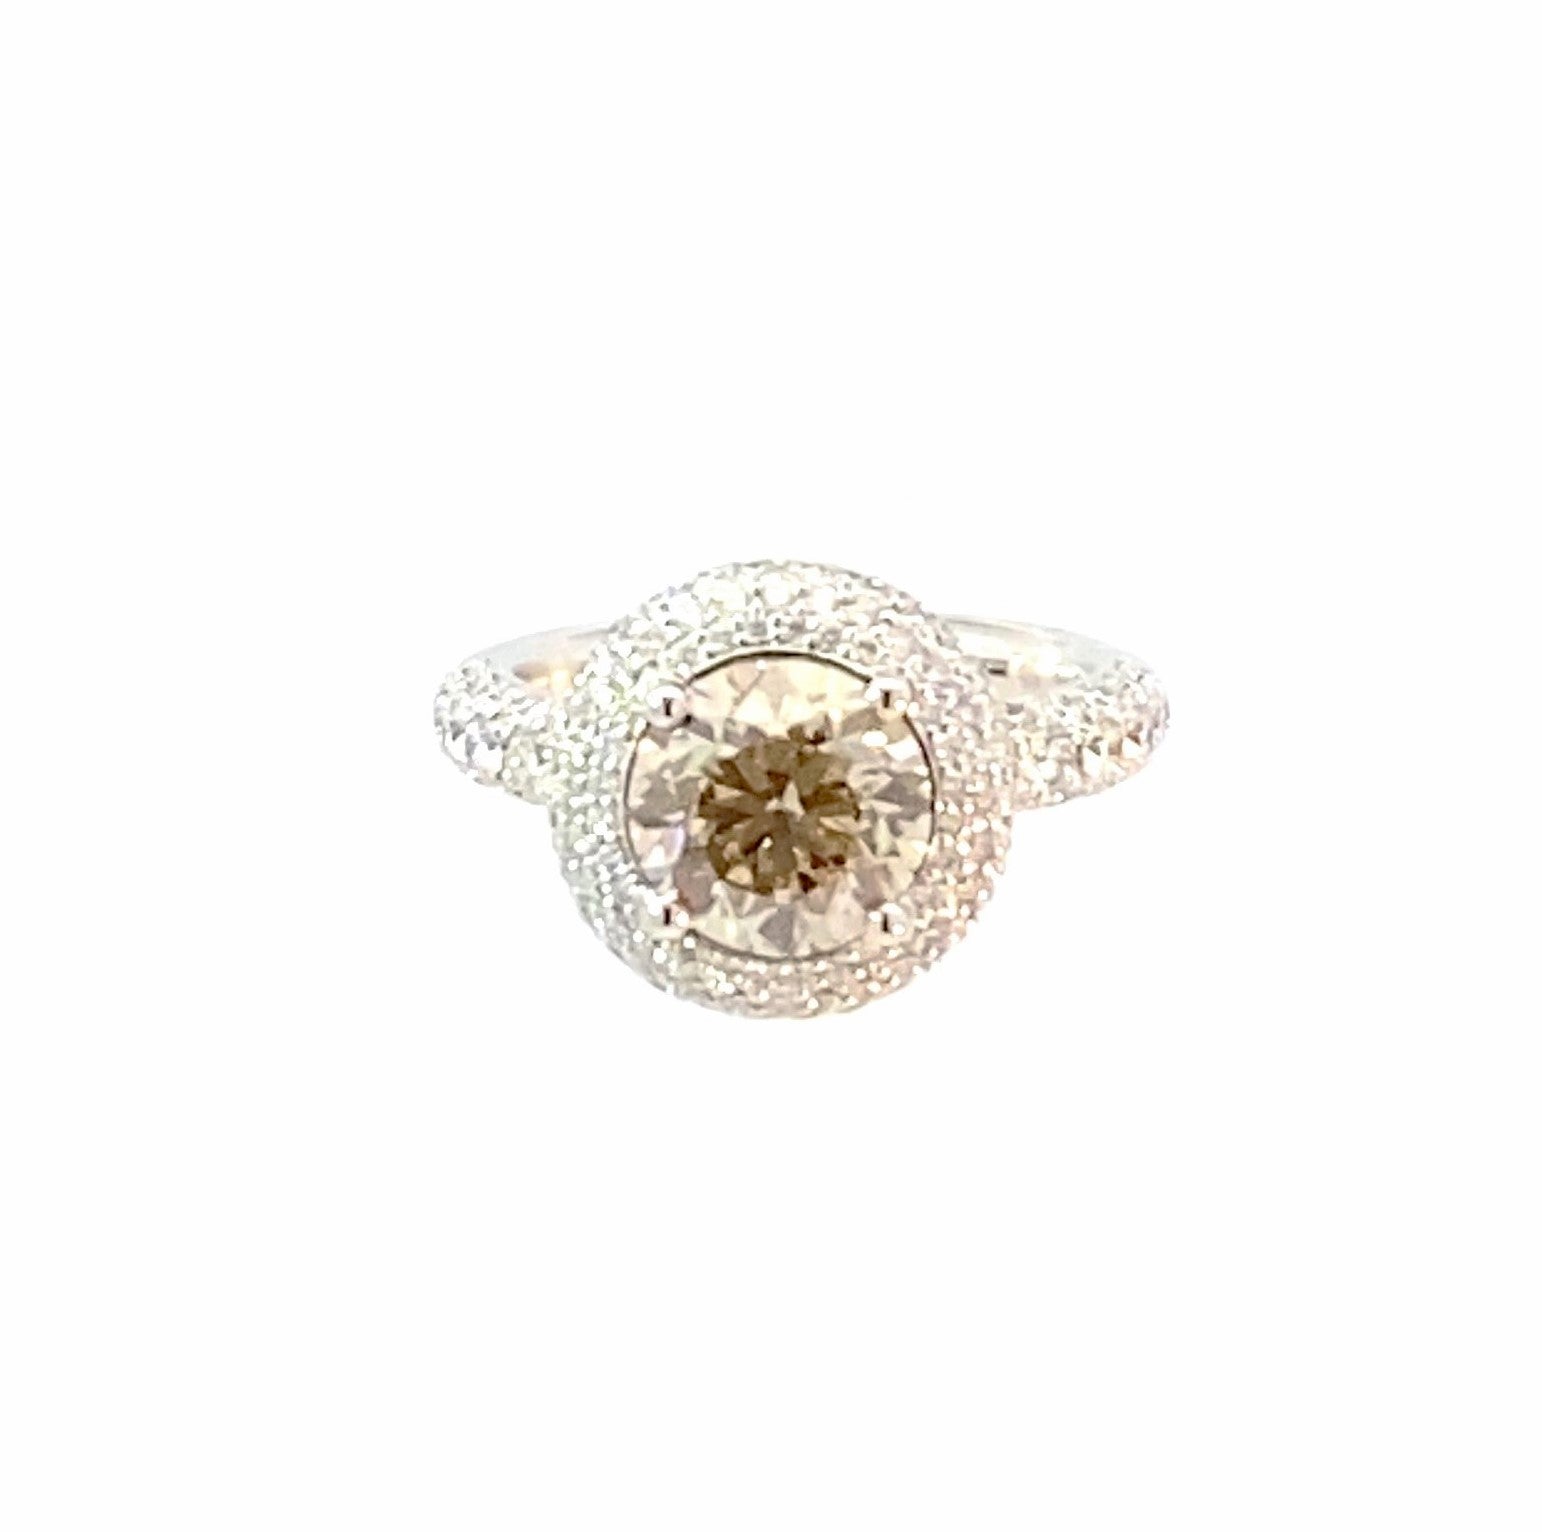 Imperiale Ring - handforged one-of-a-kind 18kt WG with 3.34ct brown diamond centerstone